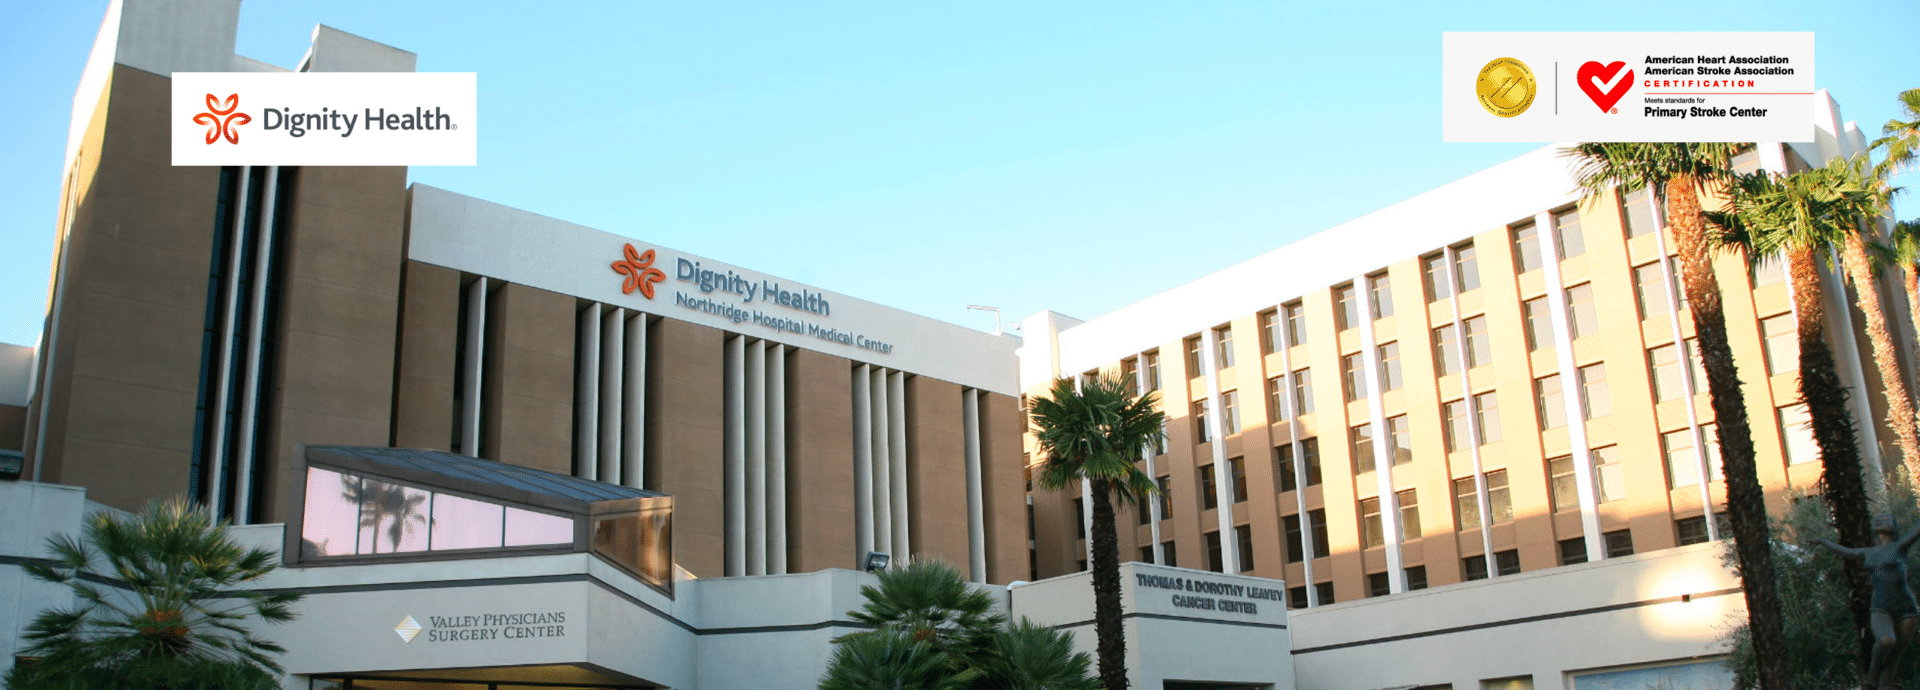 Dignity Health Southern California Stroke Centers